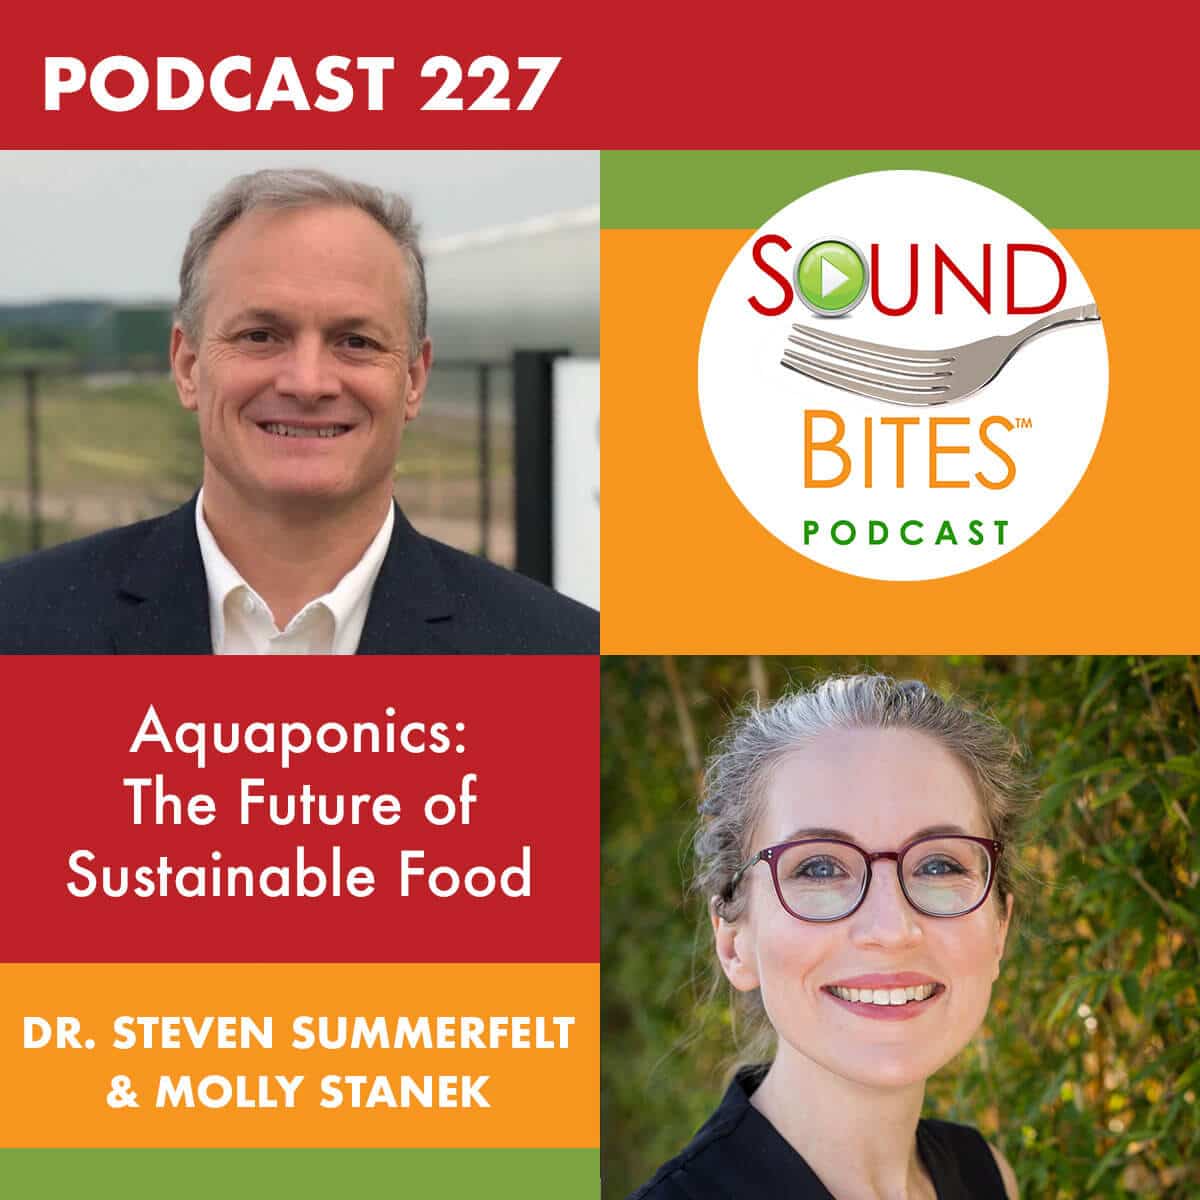 Podcast Episode 227: Aquaponics: The Future of Sustainable Food